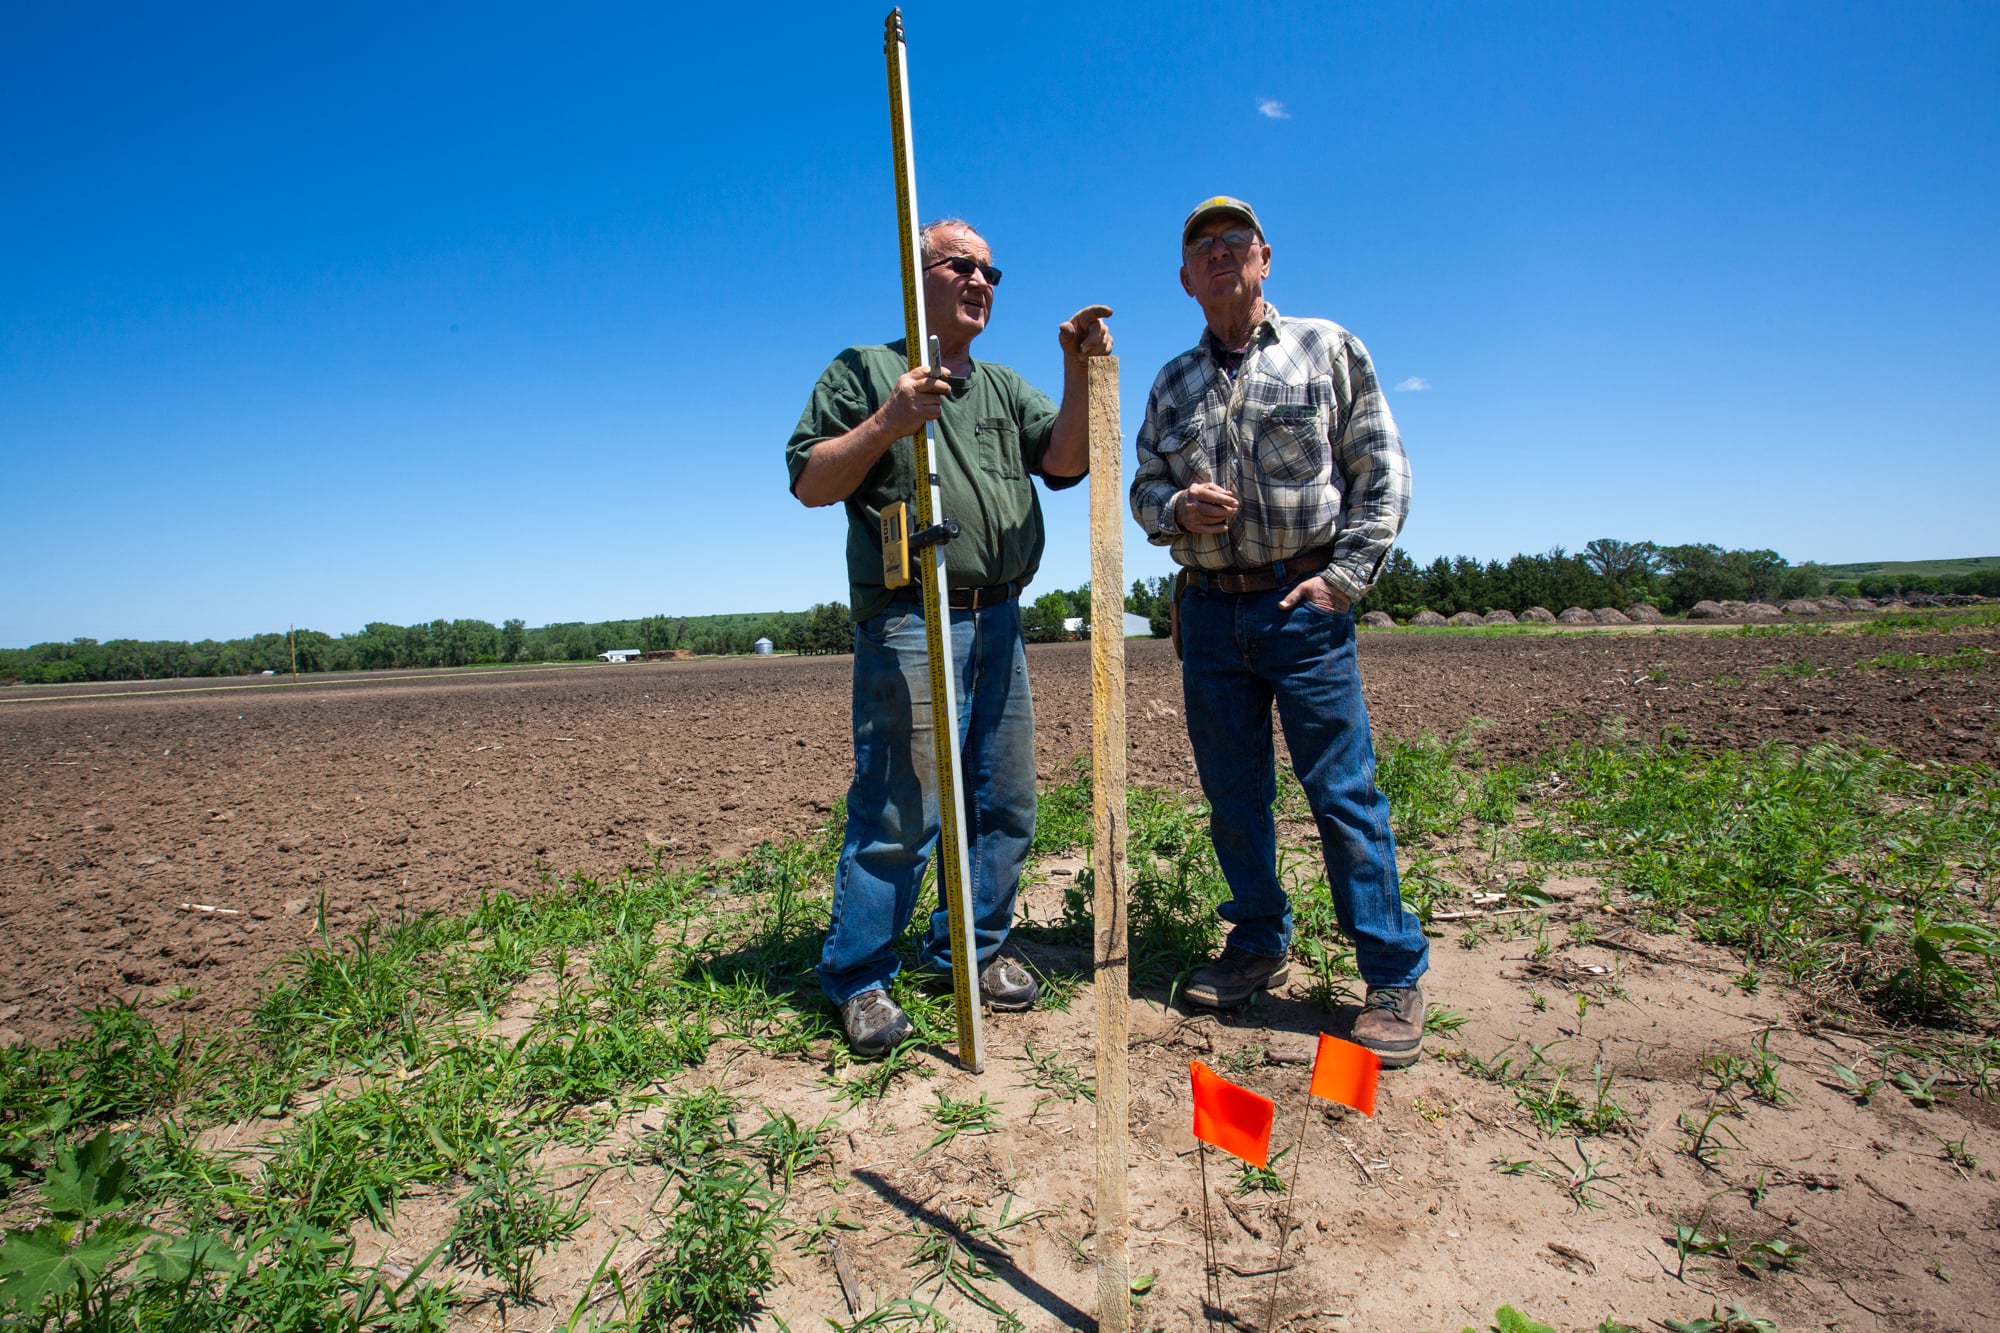 Dan Vakoc (left) plots dimensions for a repair shop on Willard Ruzicka's farm in northeastern Nebraska. Ruzicka (right) lost about 25 buildings in the flooding in March. The Ruzickas have been on their land  since the Homestead Act of 1862. (Anya Magnuson/News21)